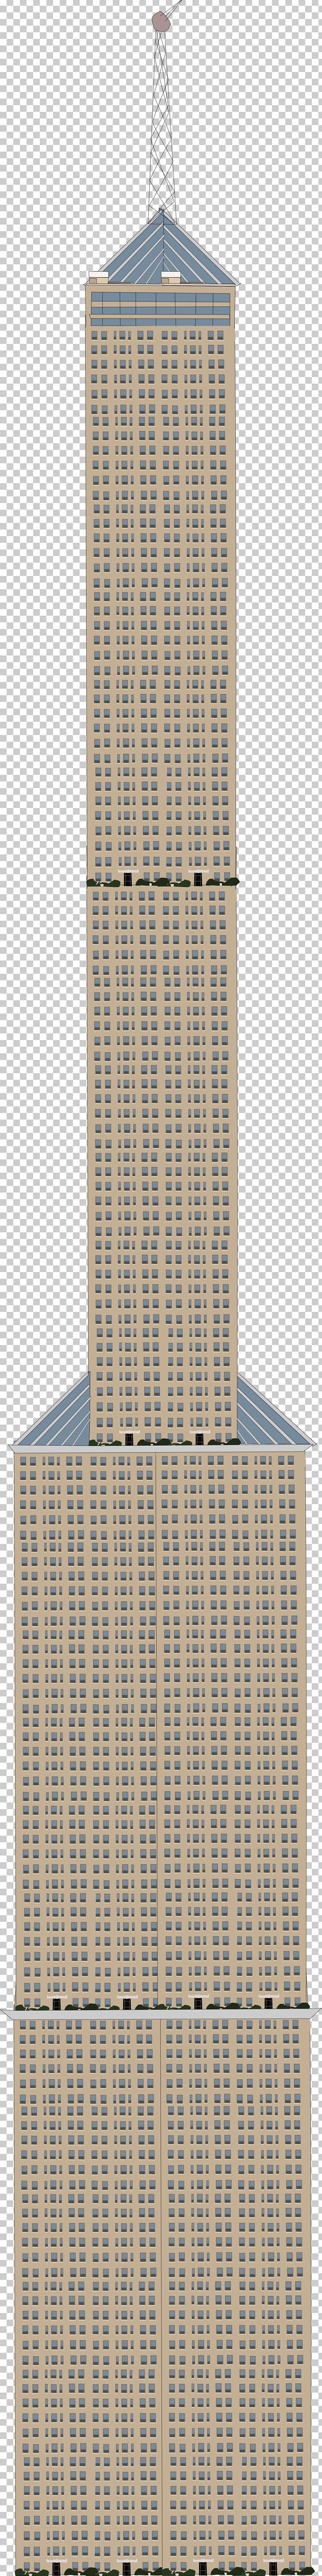 Building Skyscraper Facade PNG, Clipart, Building, Facade, Objects, Skyscraper, Tower Free PNG Download